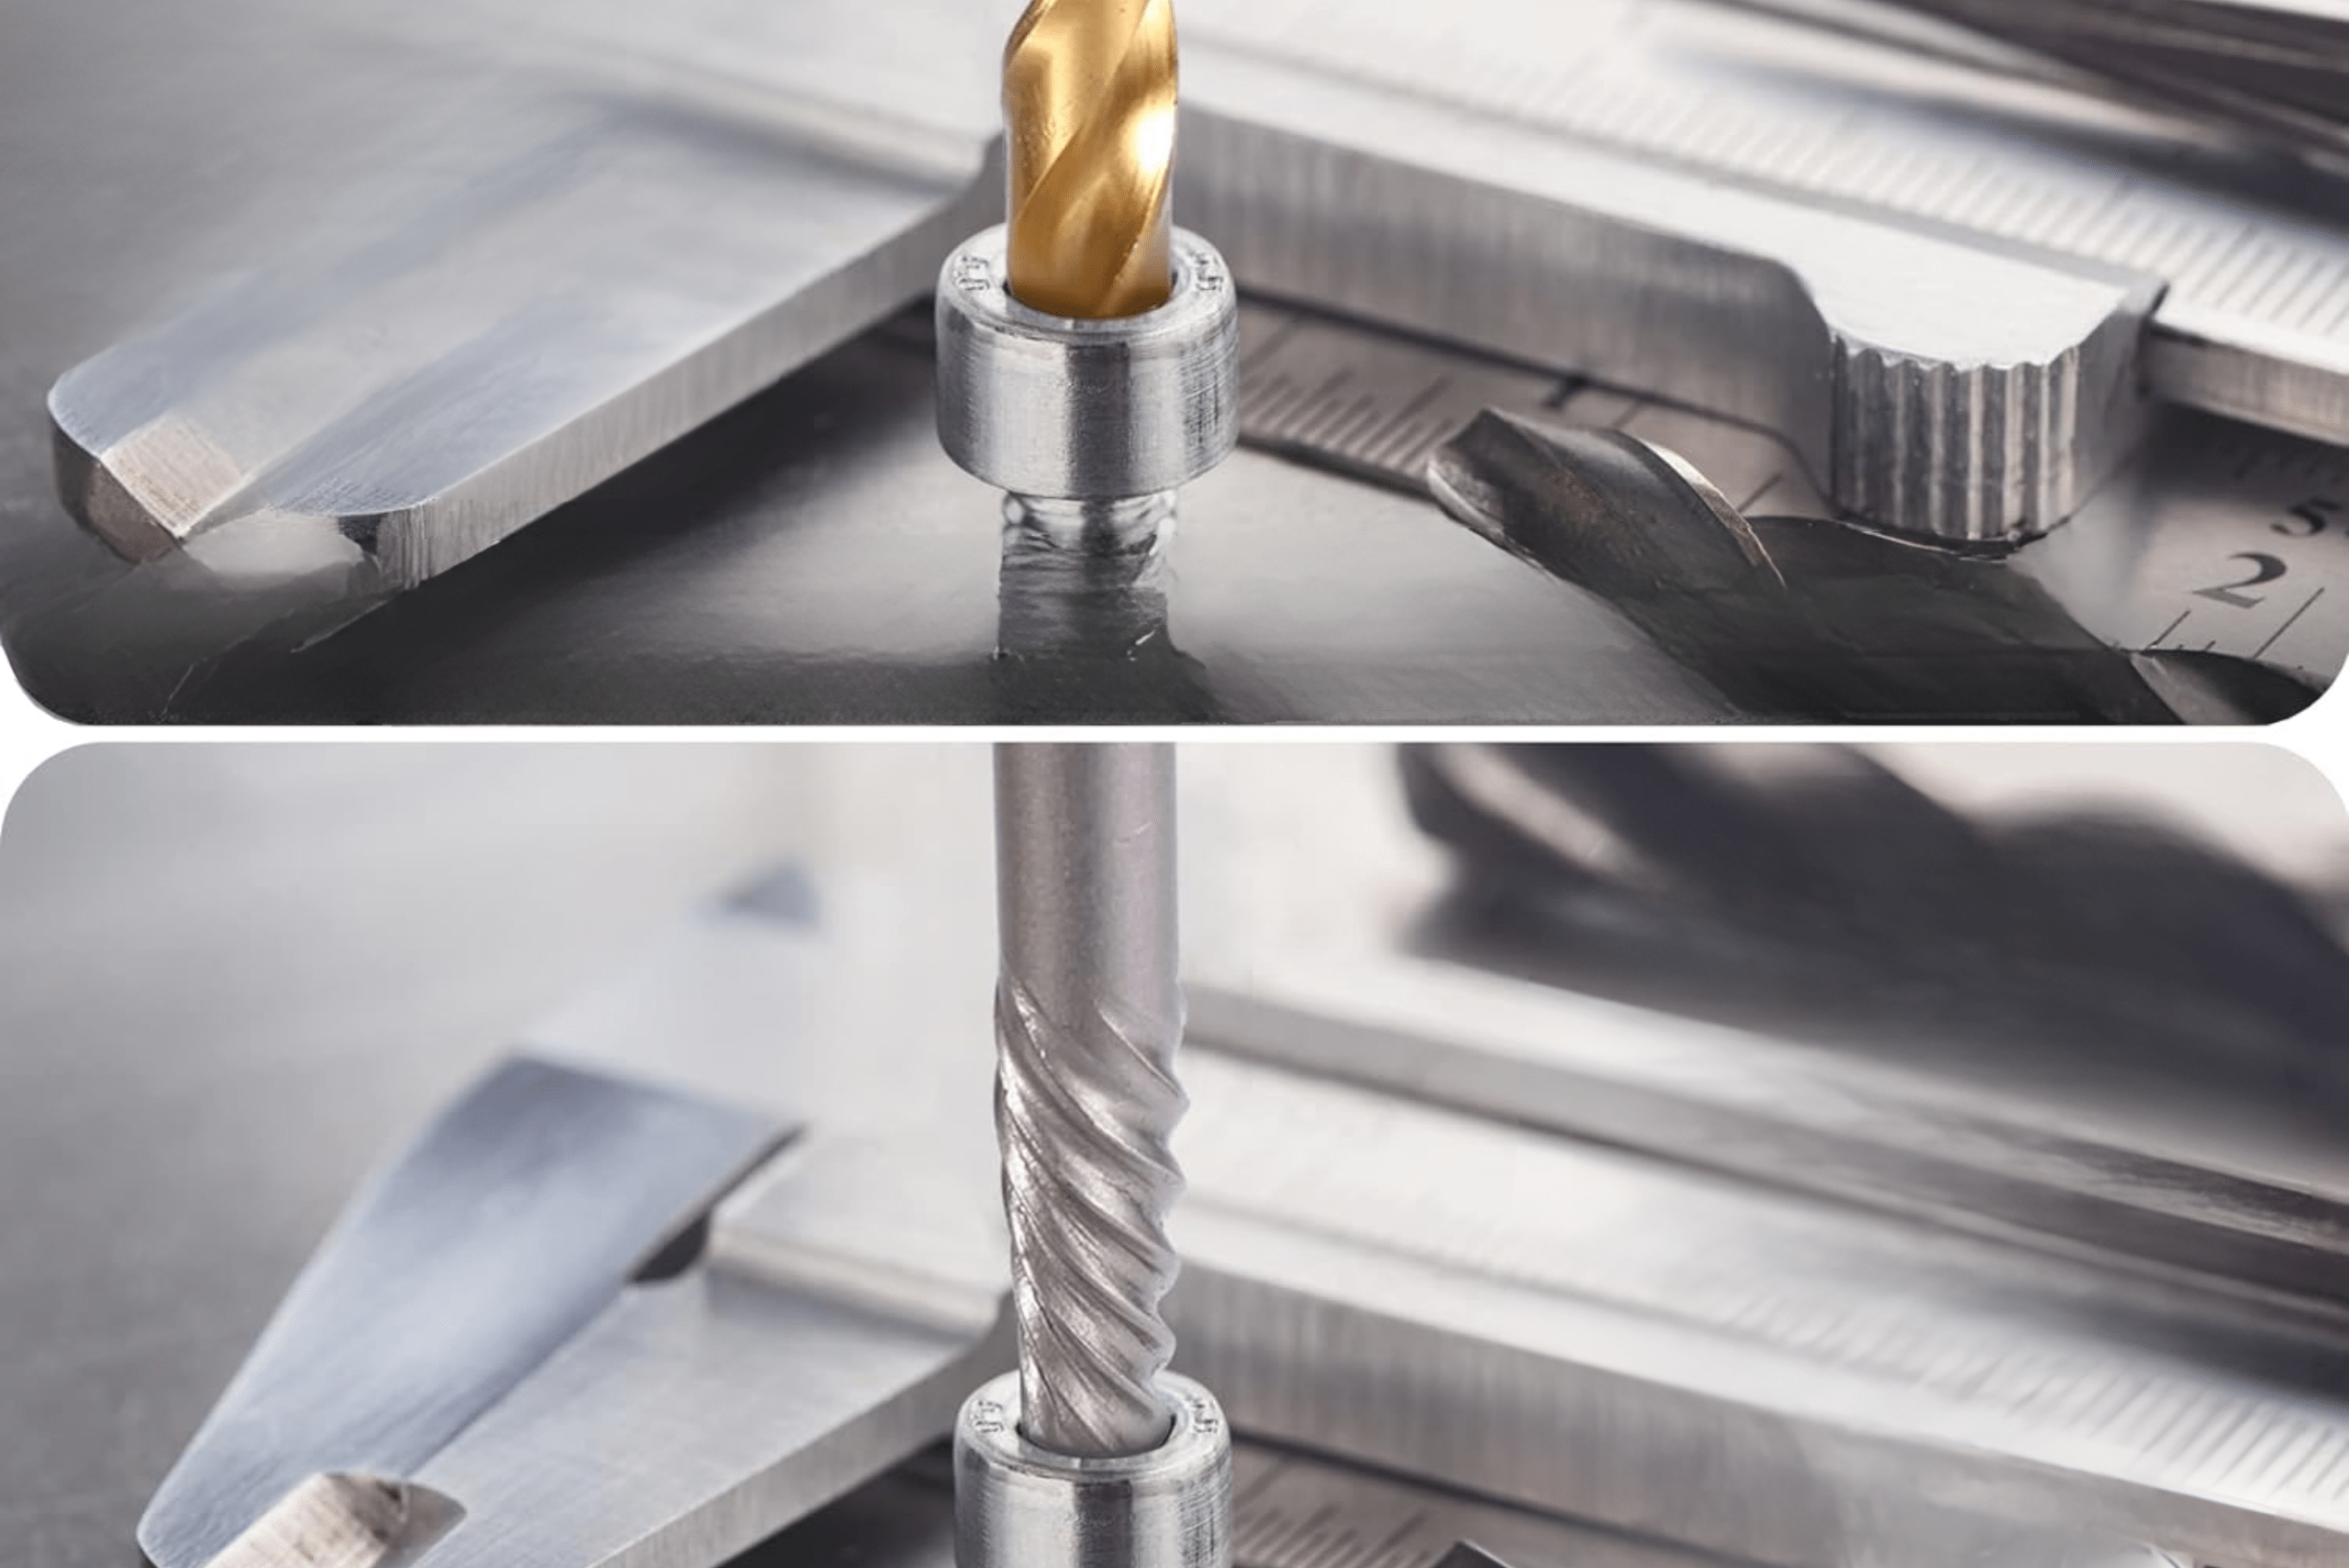 A drill bit inside a screw and extractor inside a screw underneath.